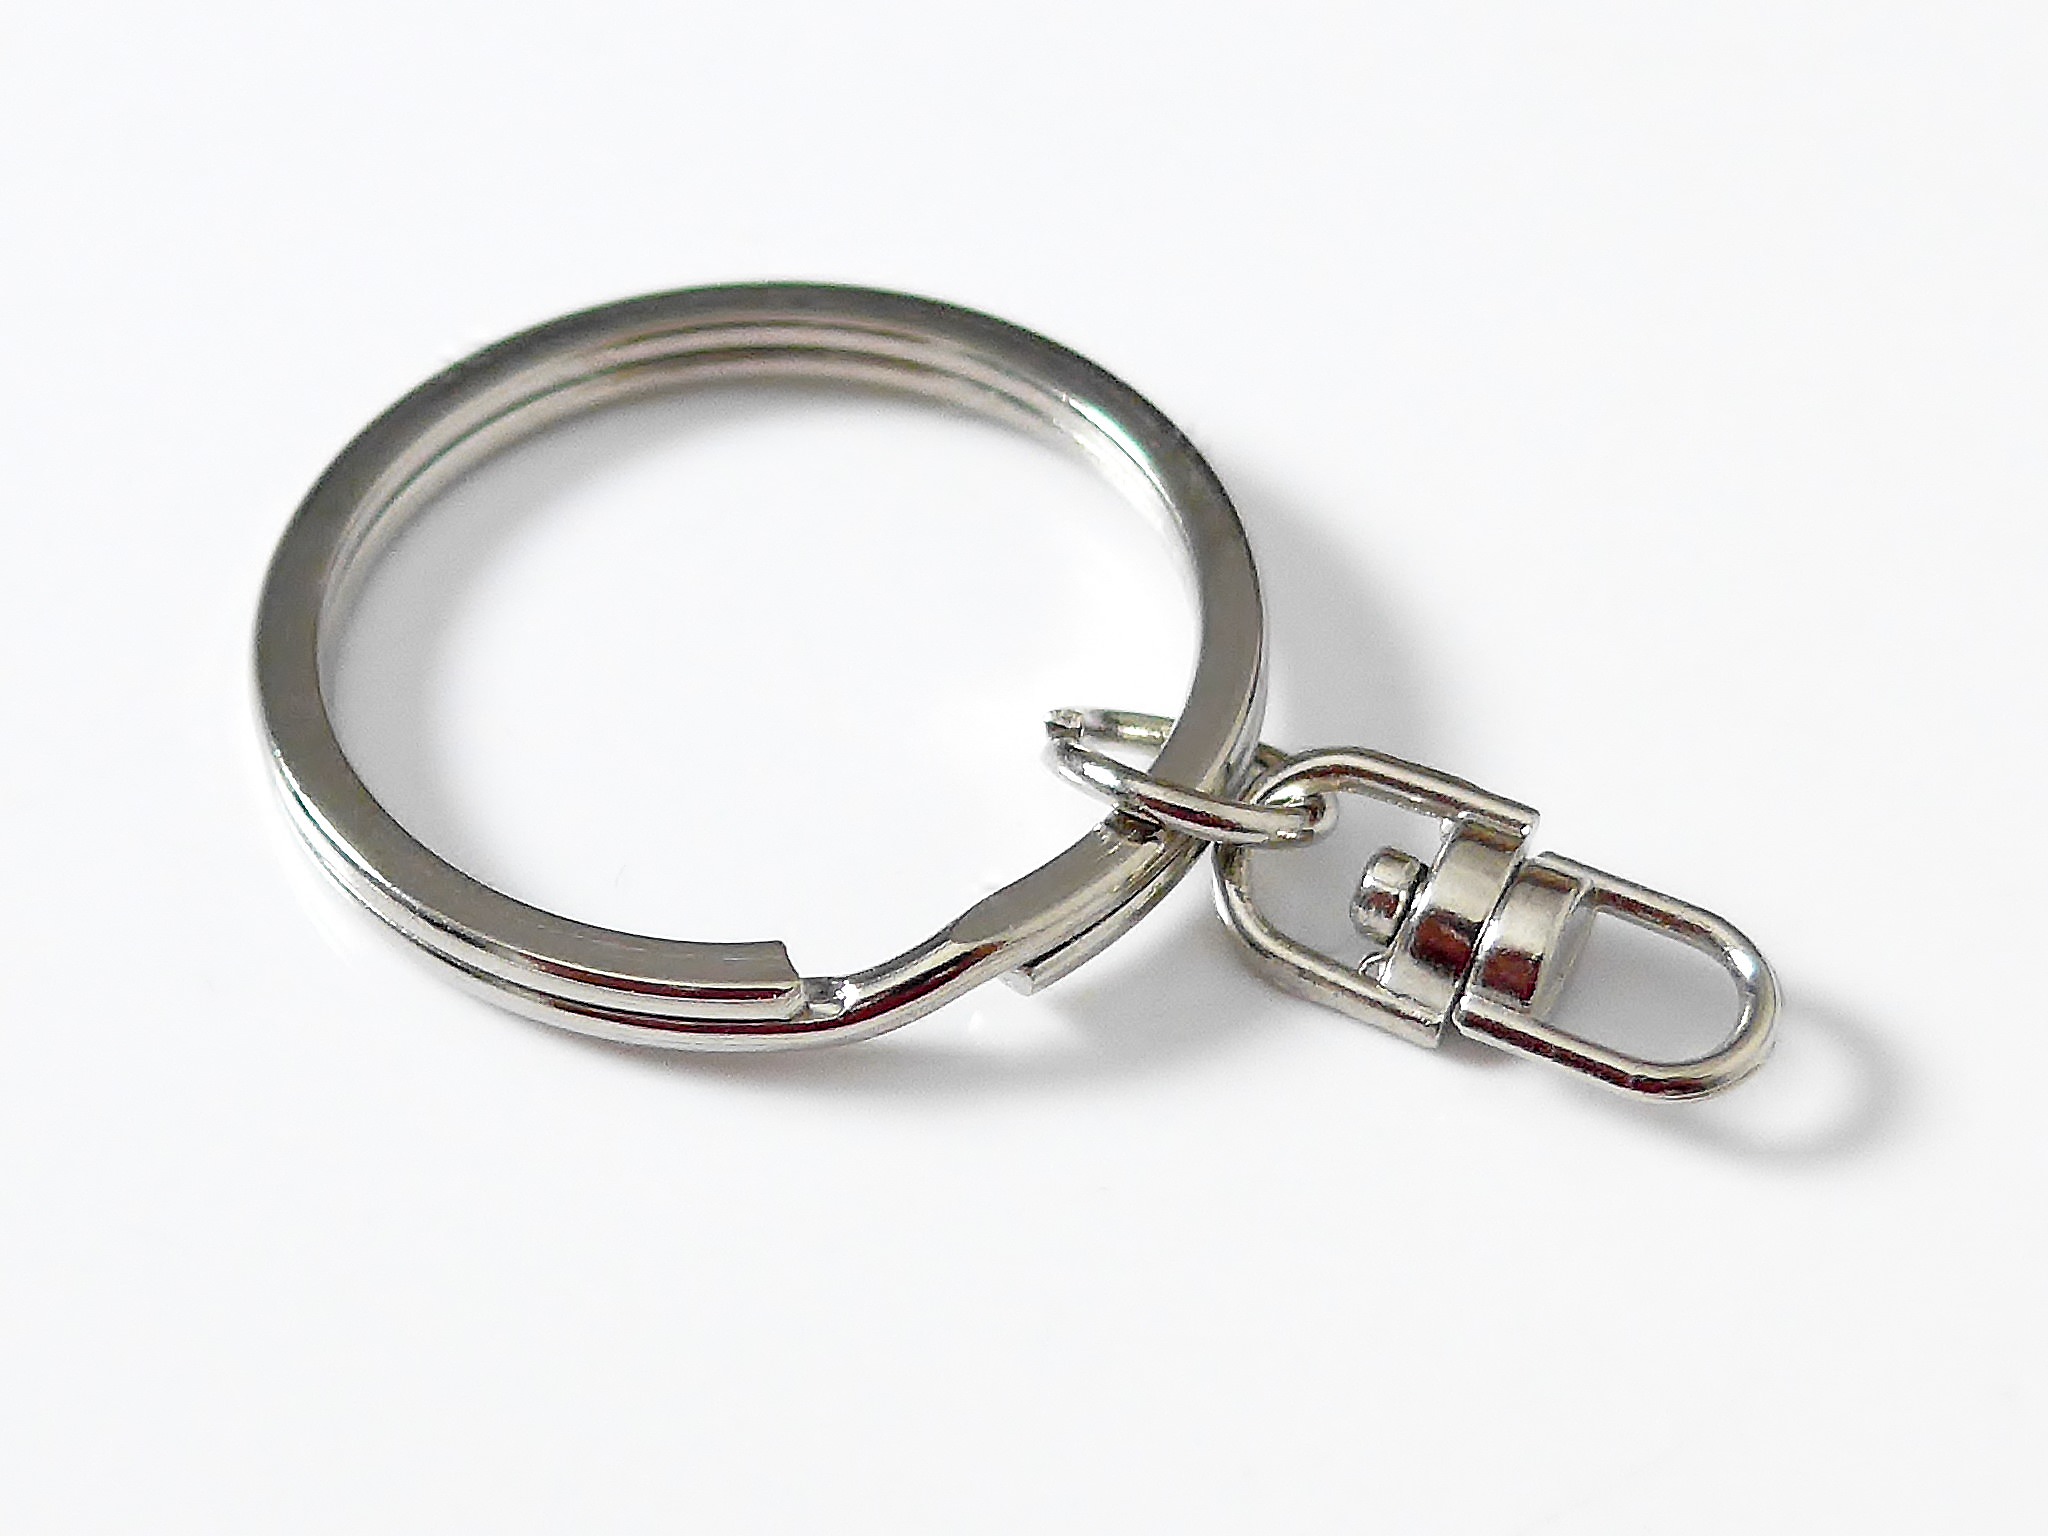 Metal Key Ring Keychain Split Ring with Swivel Connector 1 1/16 inch ...